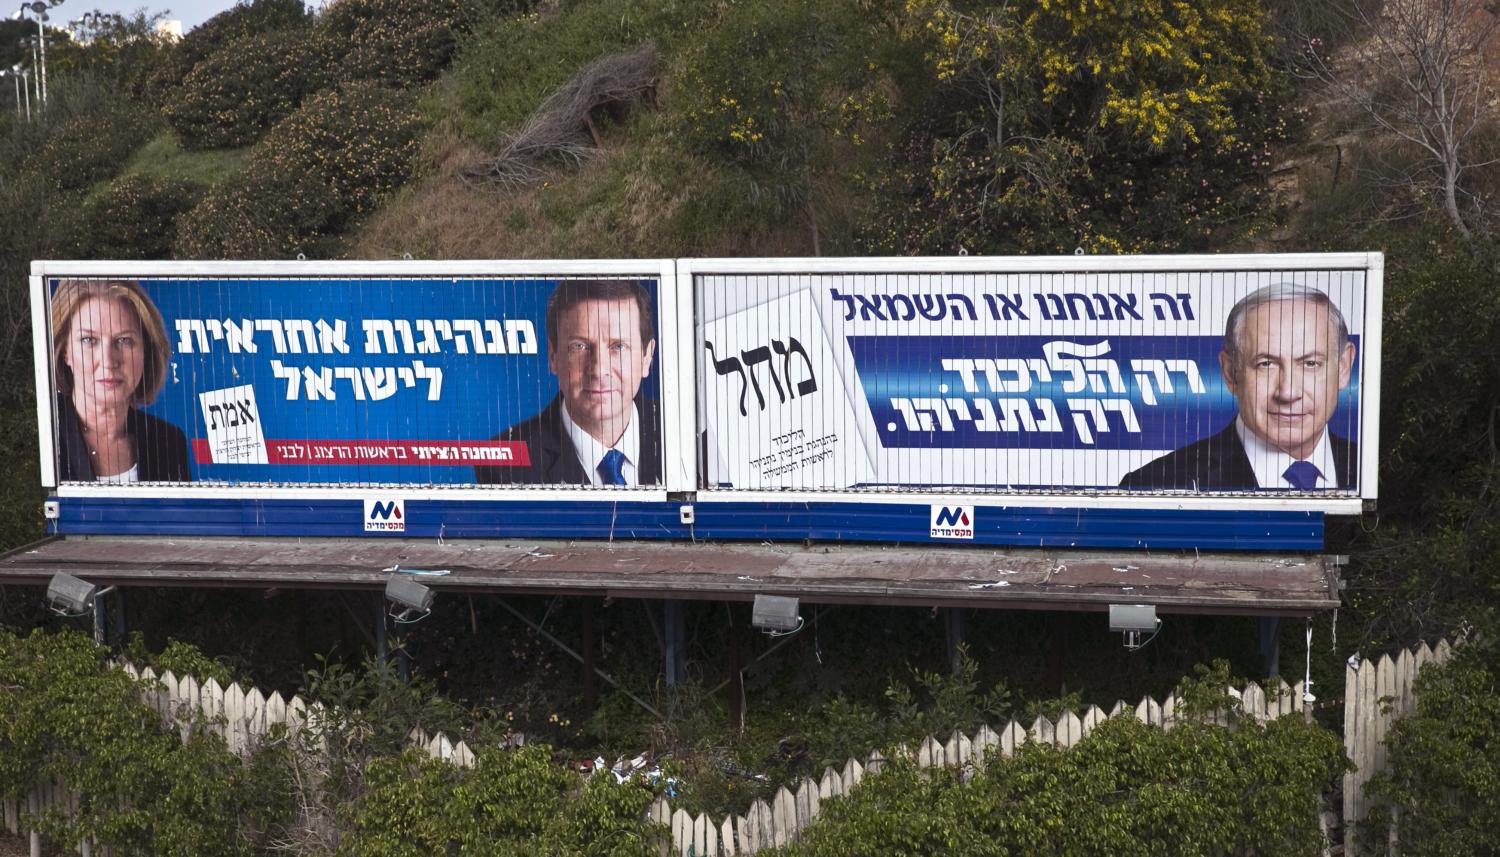 Israel's Prime Minister Benjamin Netanyahu, Isaac Herzog and Tzipi Livni are depicted on Likud (R) and Zionist Union (L) campaign billboards in Tel Aviv March 15, 2015. Israel's centre-left opposition is poised for an upset victory in next week's parliamentary election, with the last opinion polls before Tuesday's vote giving it a solid lead over Netanyahu's party. REUTERS/Baz Ratner (ISRAEL - Tags: POLITICS ELECTIONS) - RTR4TFG2